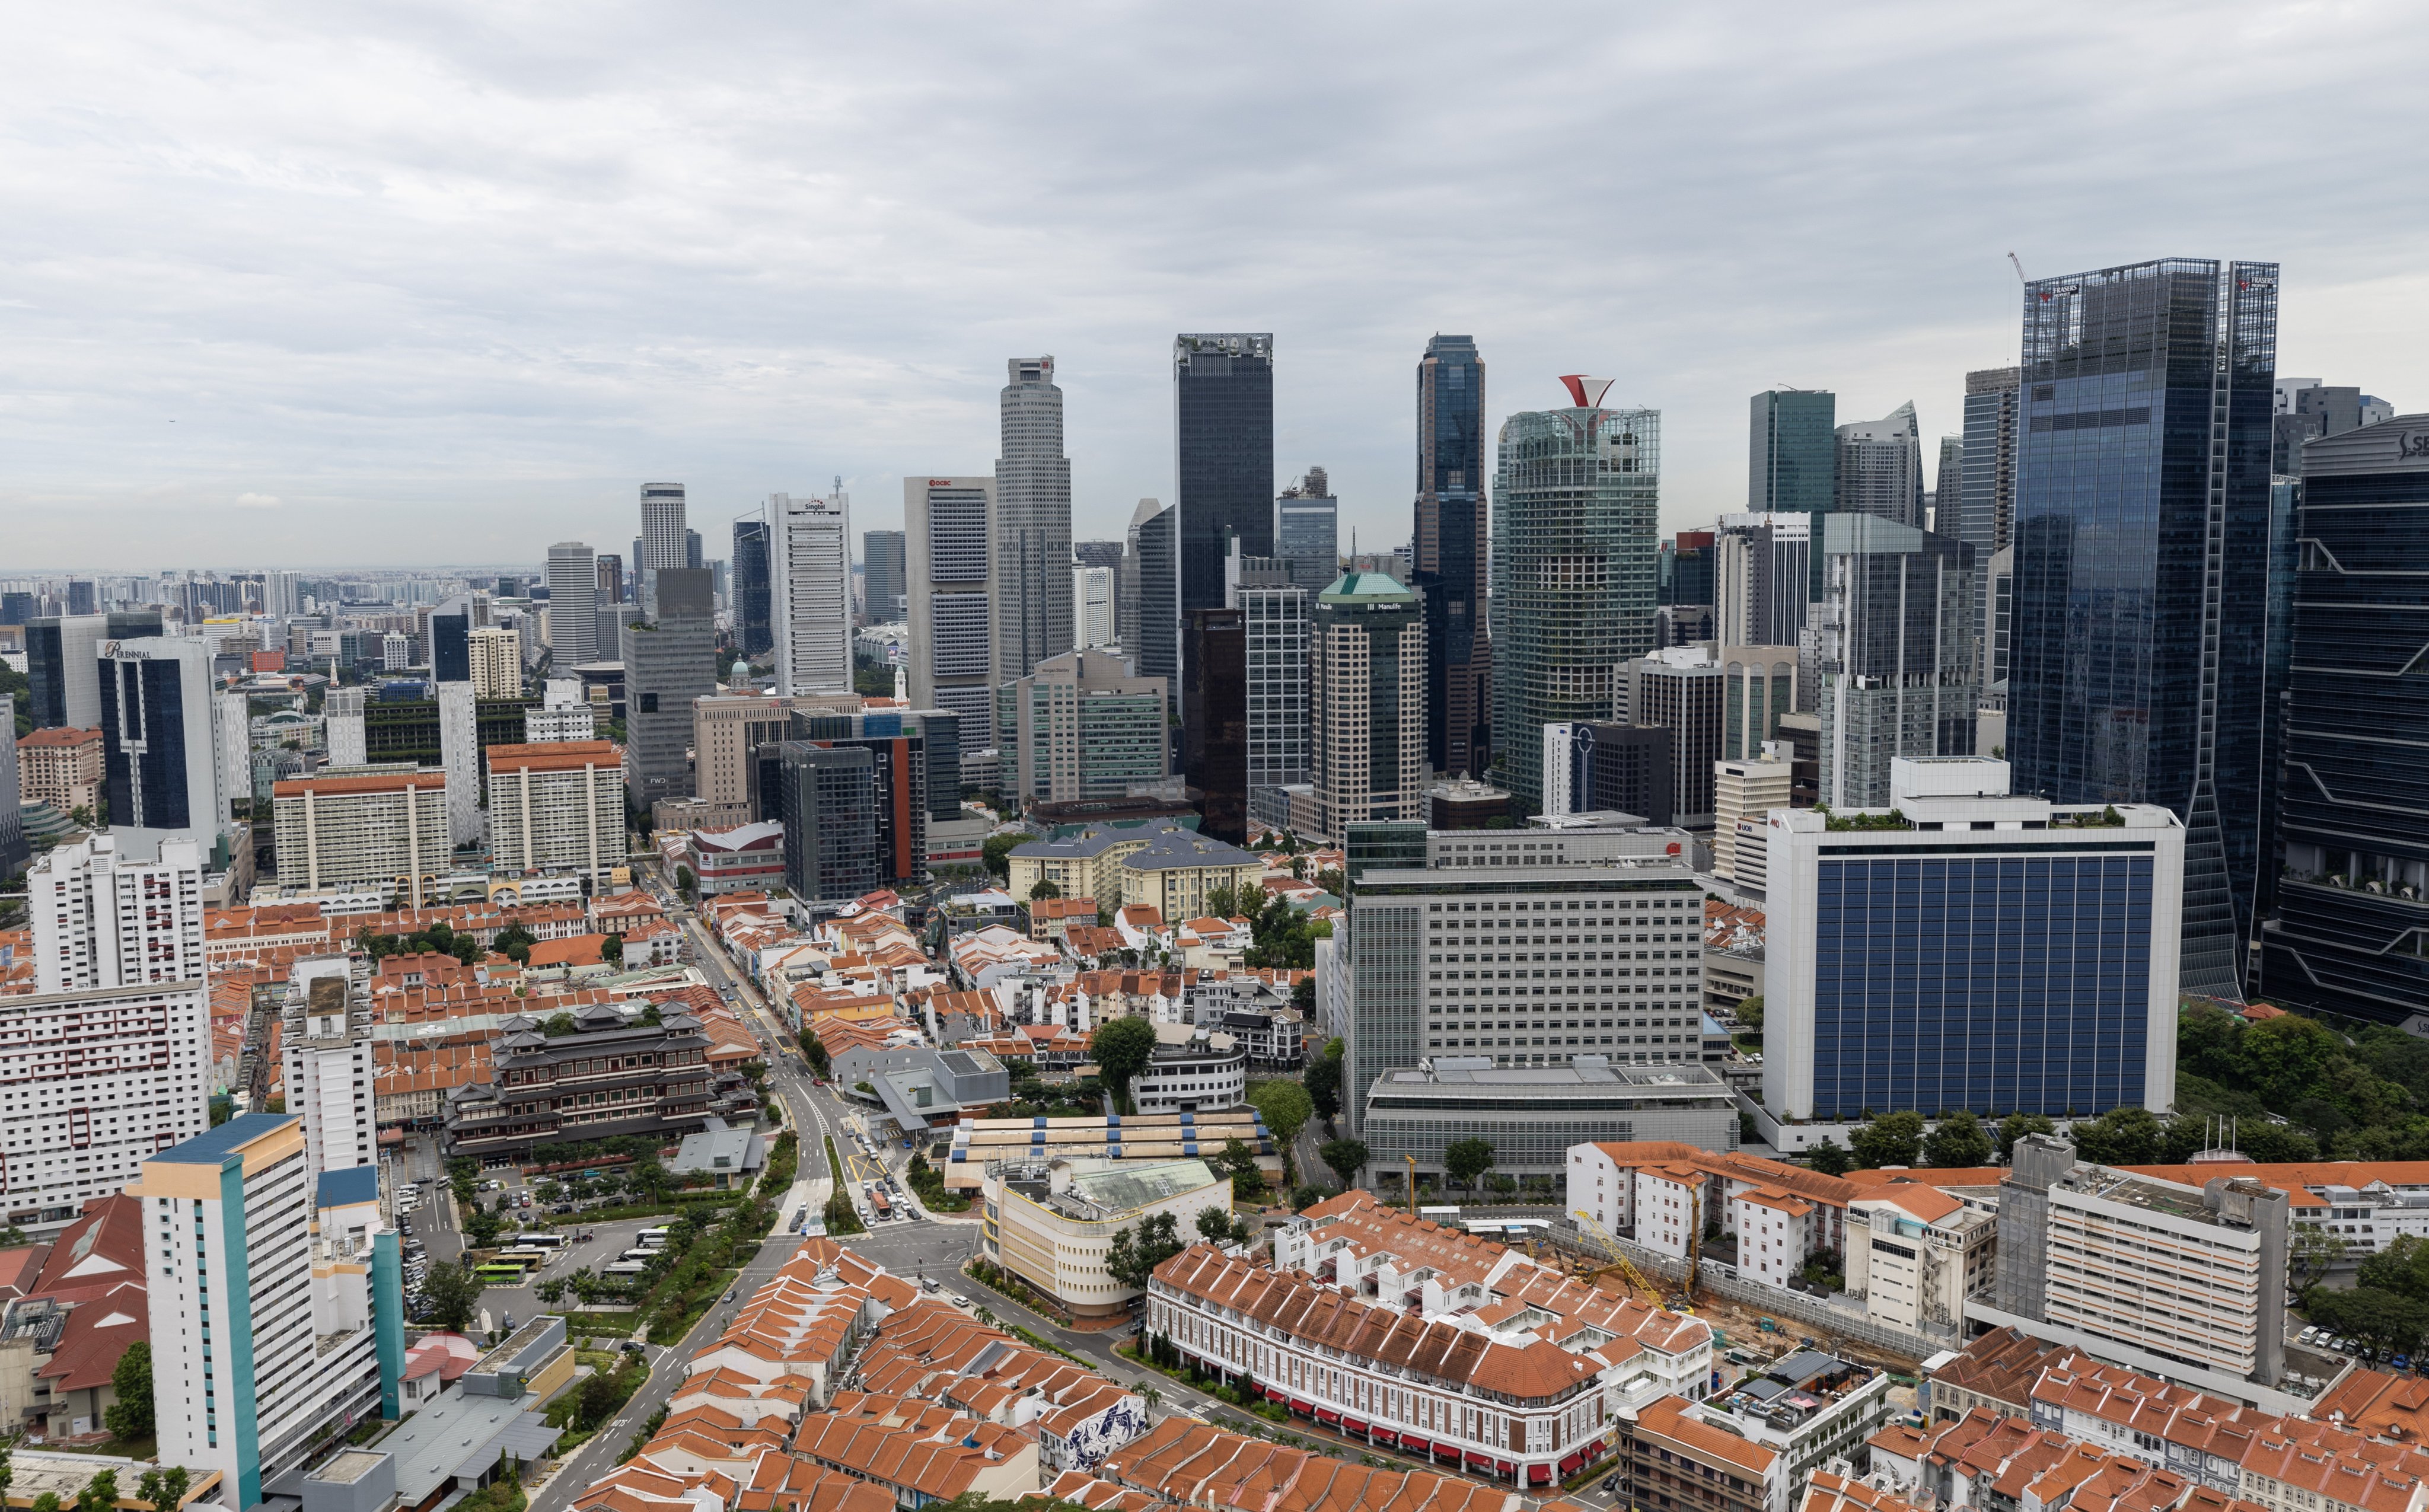 The central business district and surrounding areas in Singapore. Photo: EPA-EFE